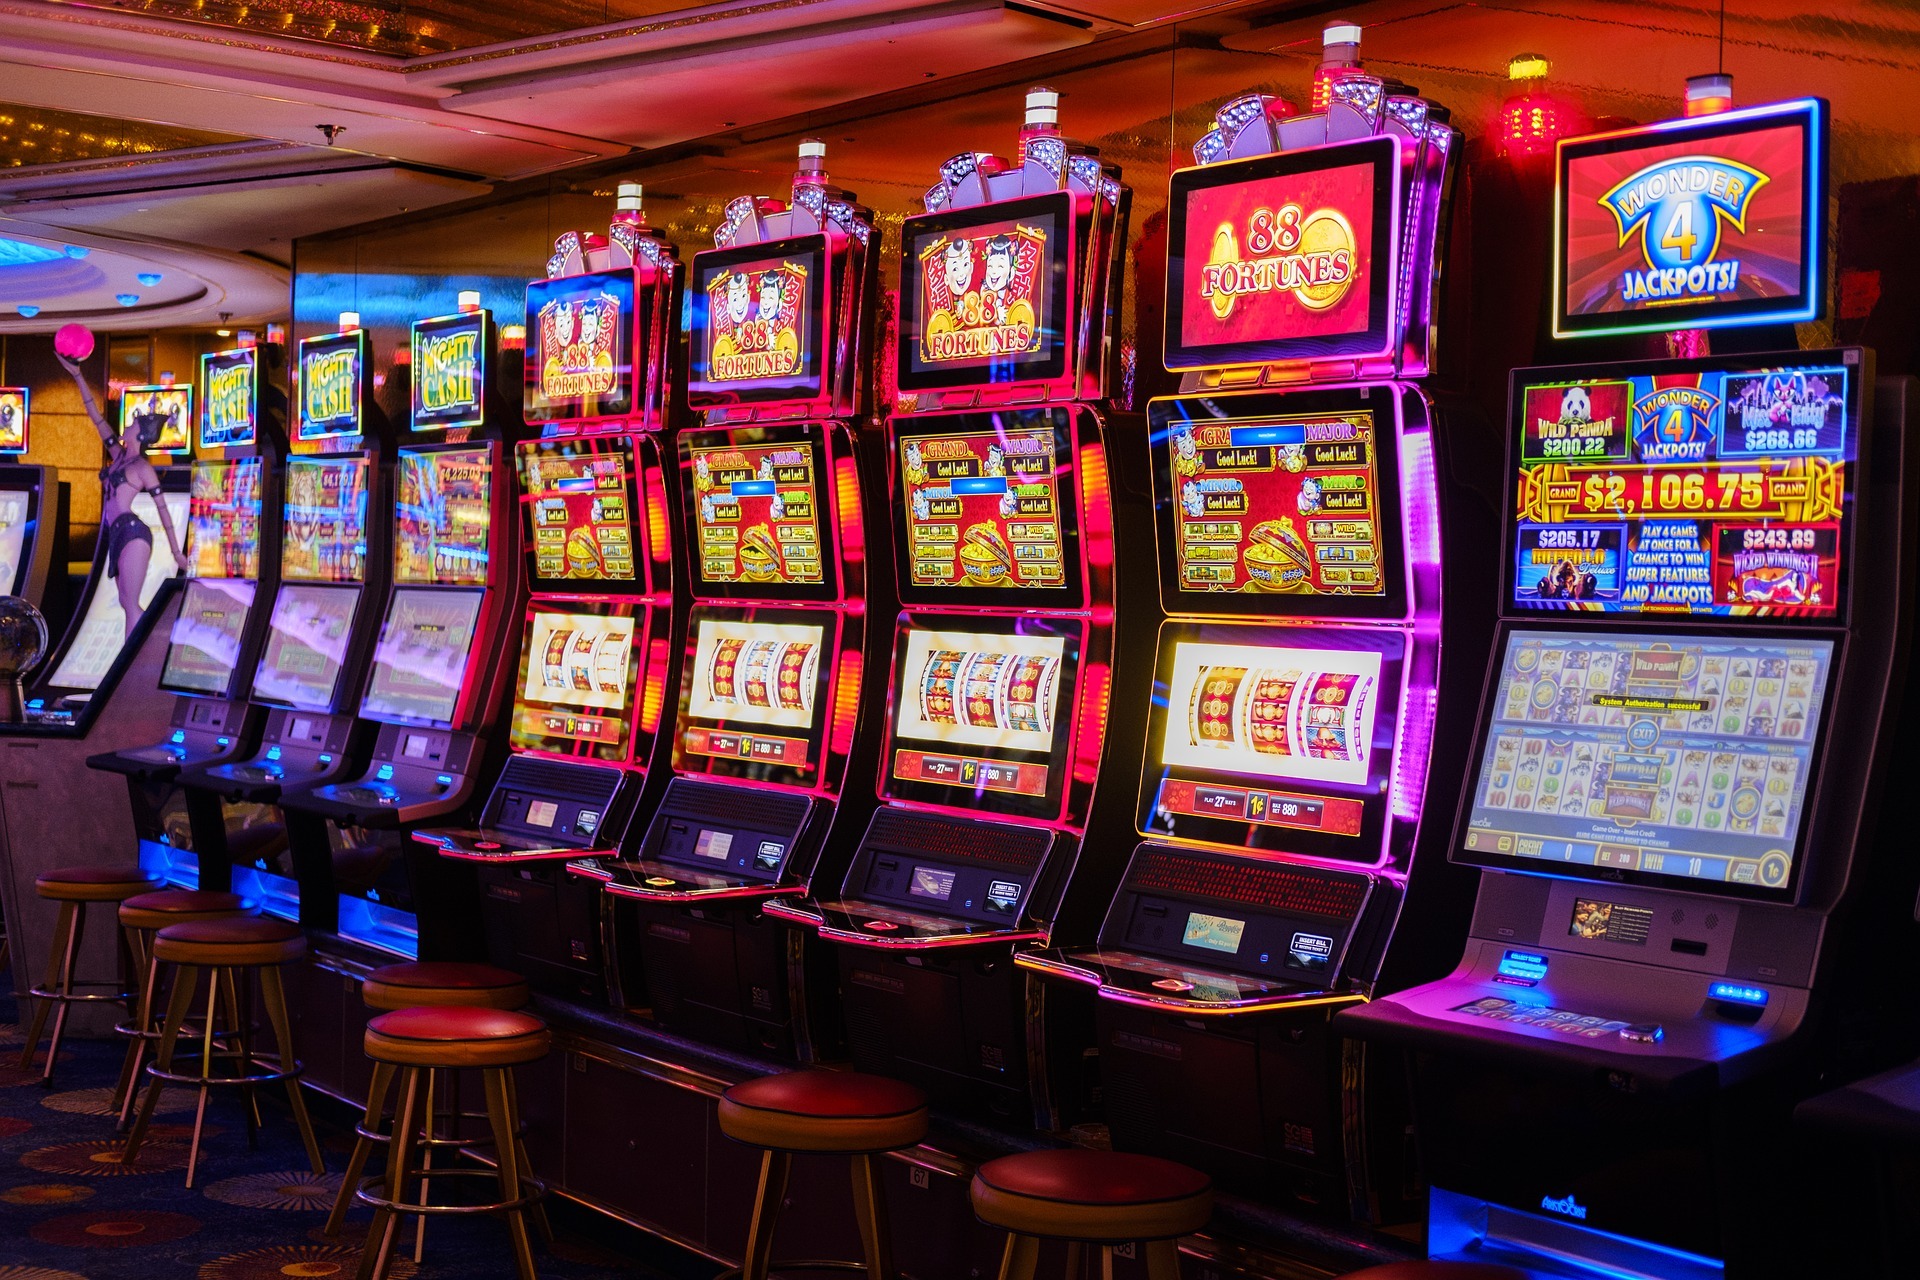 10 Secret Things You Didn't Know About slots